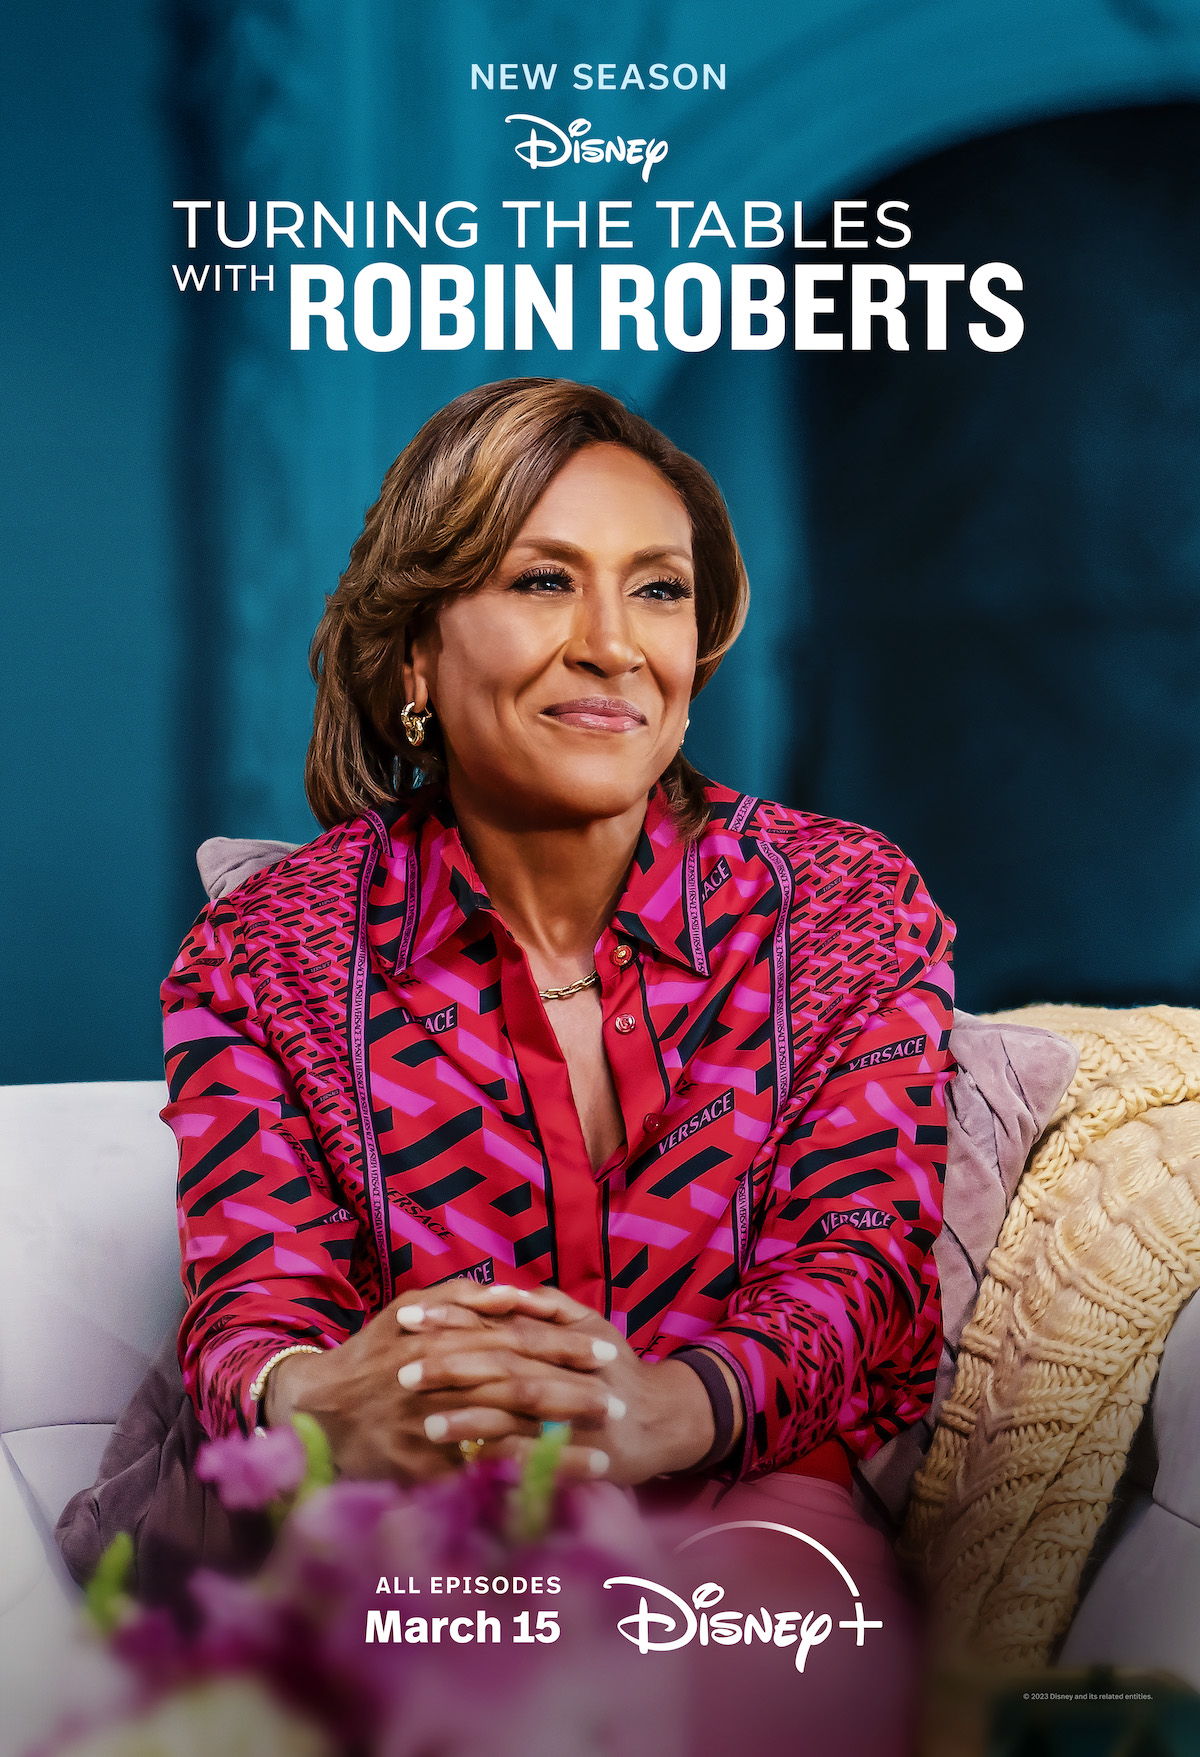 Robin Roberts Turning The Tables Season 2 Key art and First Look Images